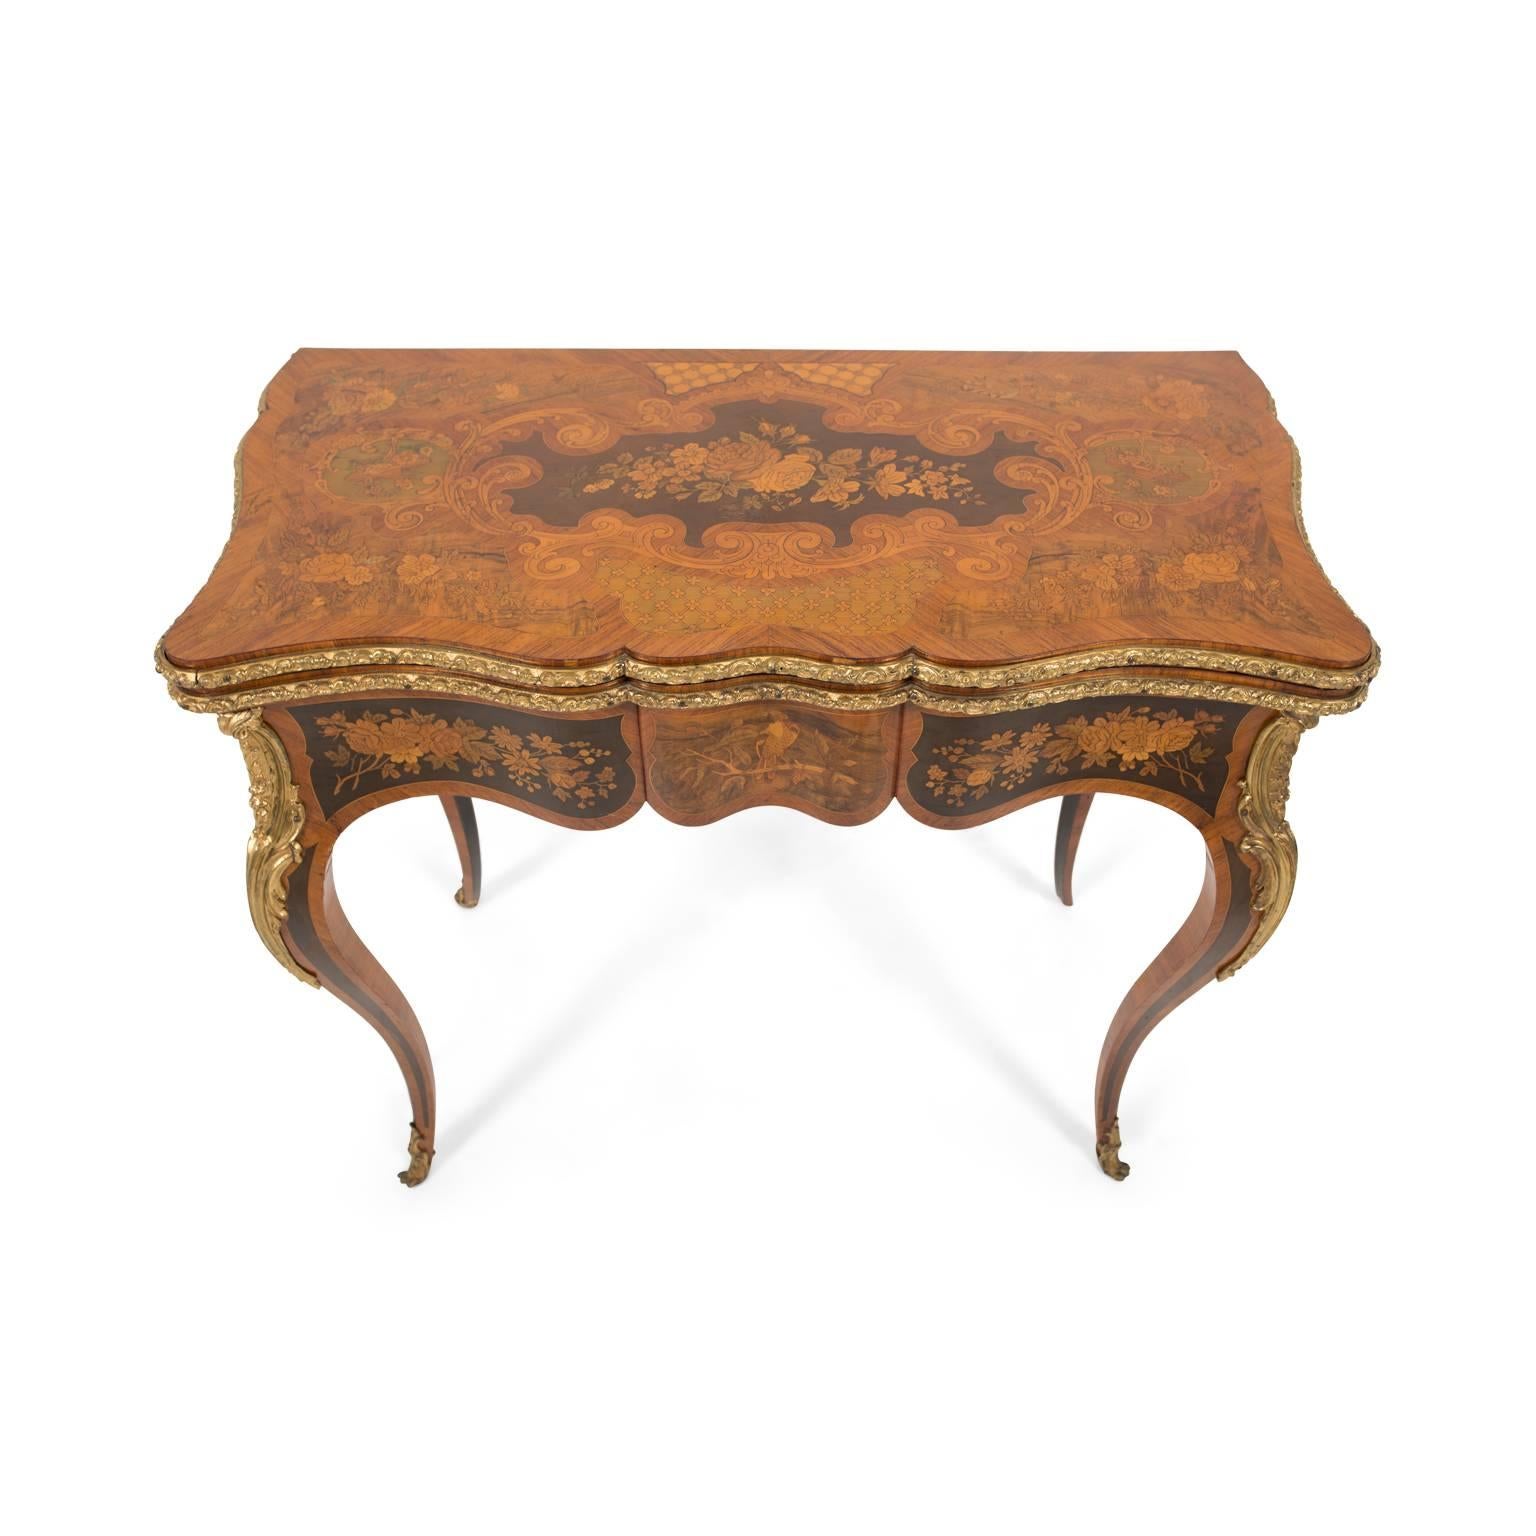 Gorgeous French Louis XV Revival games table with top-quality craftsmanship, classical and detailed gilt mounts, beautifully bowed legs, and highly inlaid surfaces. 

The Jeanselme firm was founded in 1834 and within ten years had acquired the